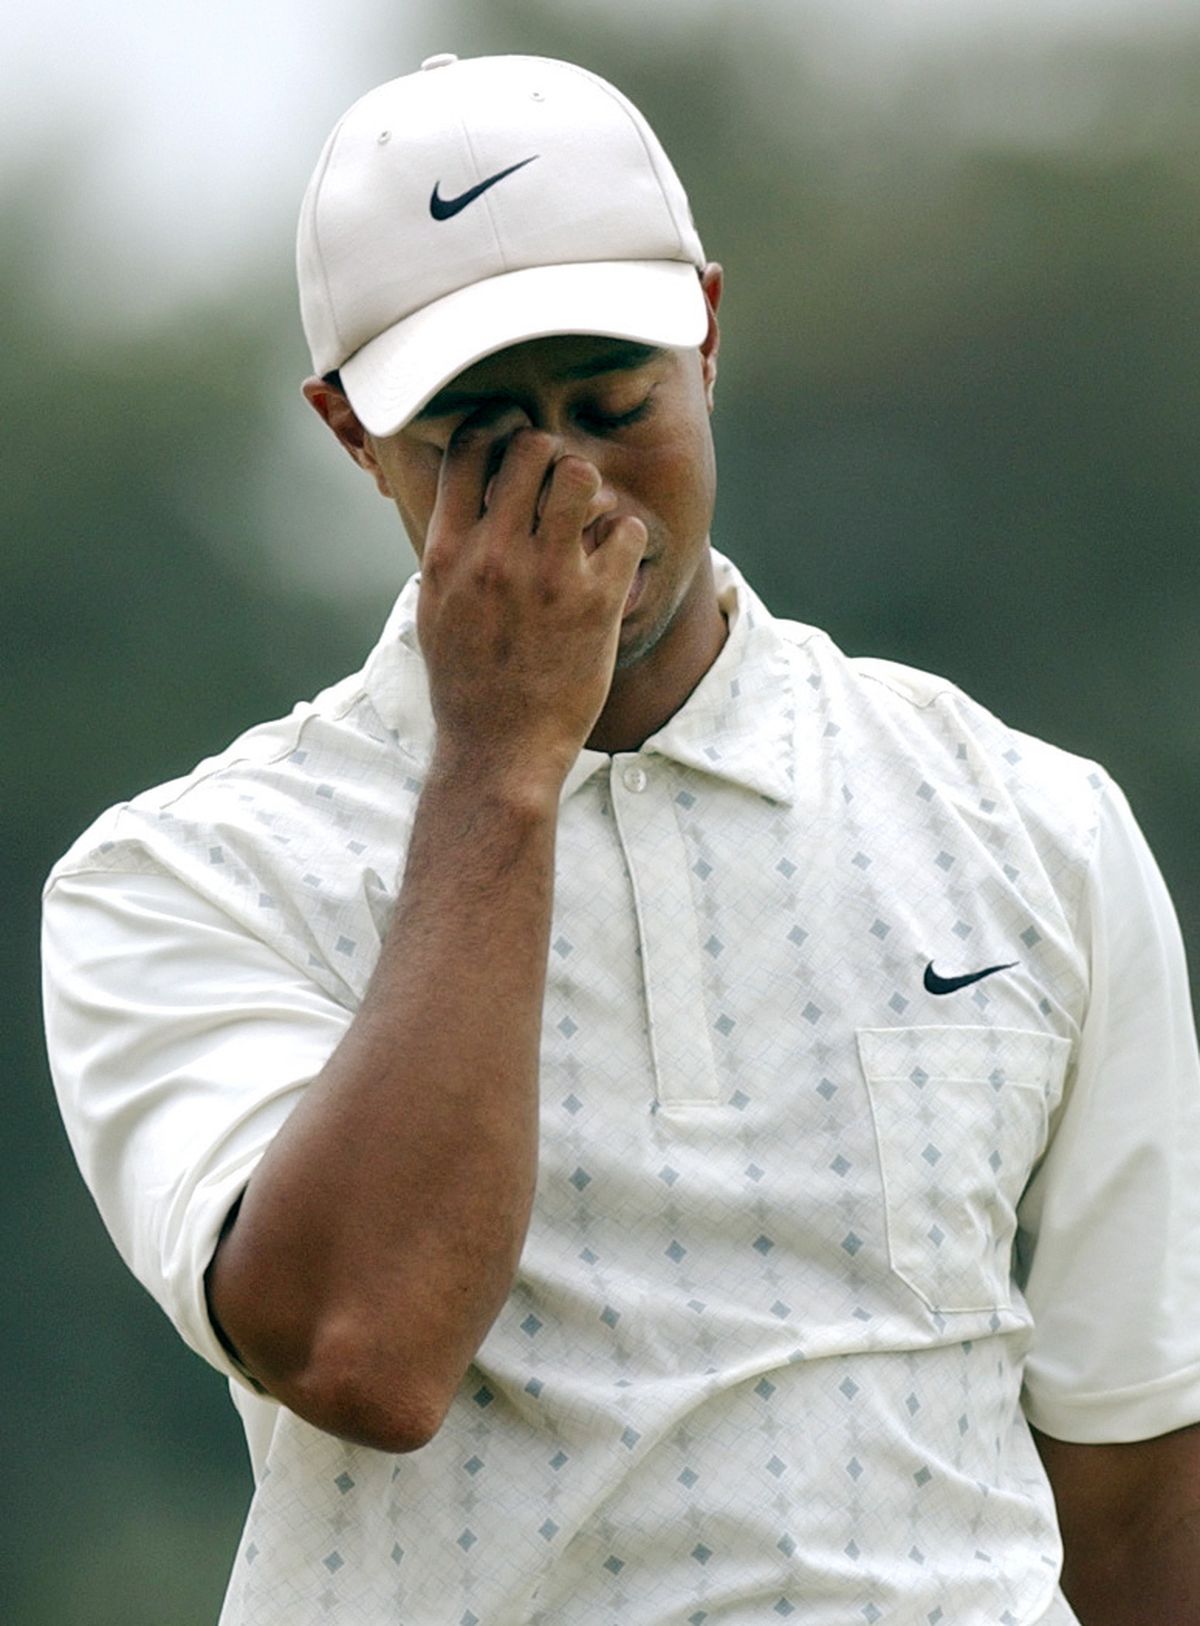 FILE - In this Saturday, June 19, 2004, file photo, Tiger Woods reacts on the fifth fairway after his shot toward the green during the third round of the U.S. at Shinnecock Hills Golf Club in Southampton, N.Y. Nike forgave a contrite Tiger Woods after his infidelity was exposed. It welcomed back an apologetic Michael Vick once he served time for illegal dog-fighting. But the company dropped Lance Armstrong, Wednesday, Oct. 17, 2012, faster than the famed cycler could do a lap around the block. (Charles Krupa / Associated Press)